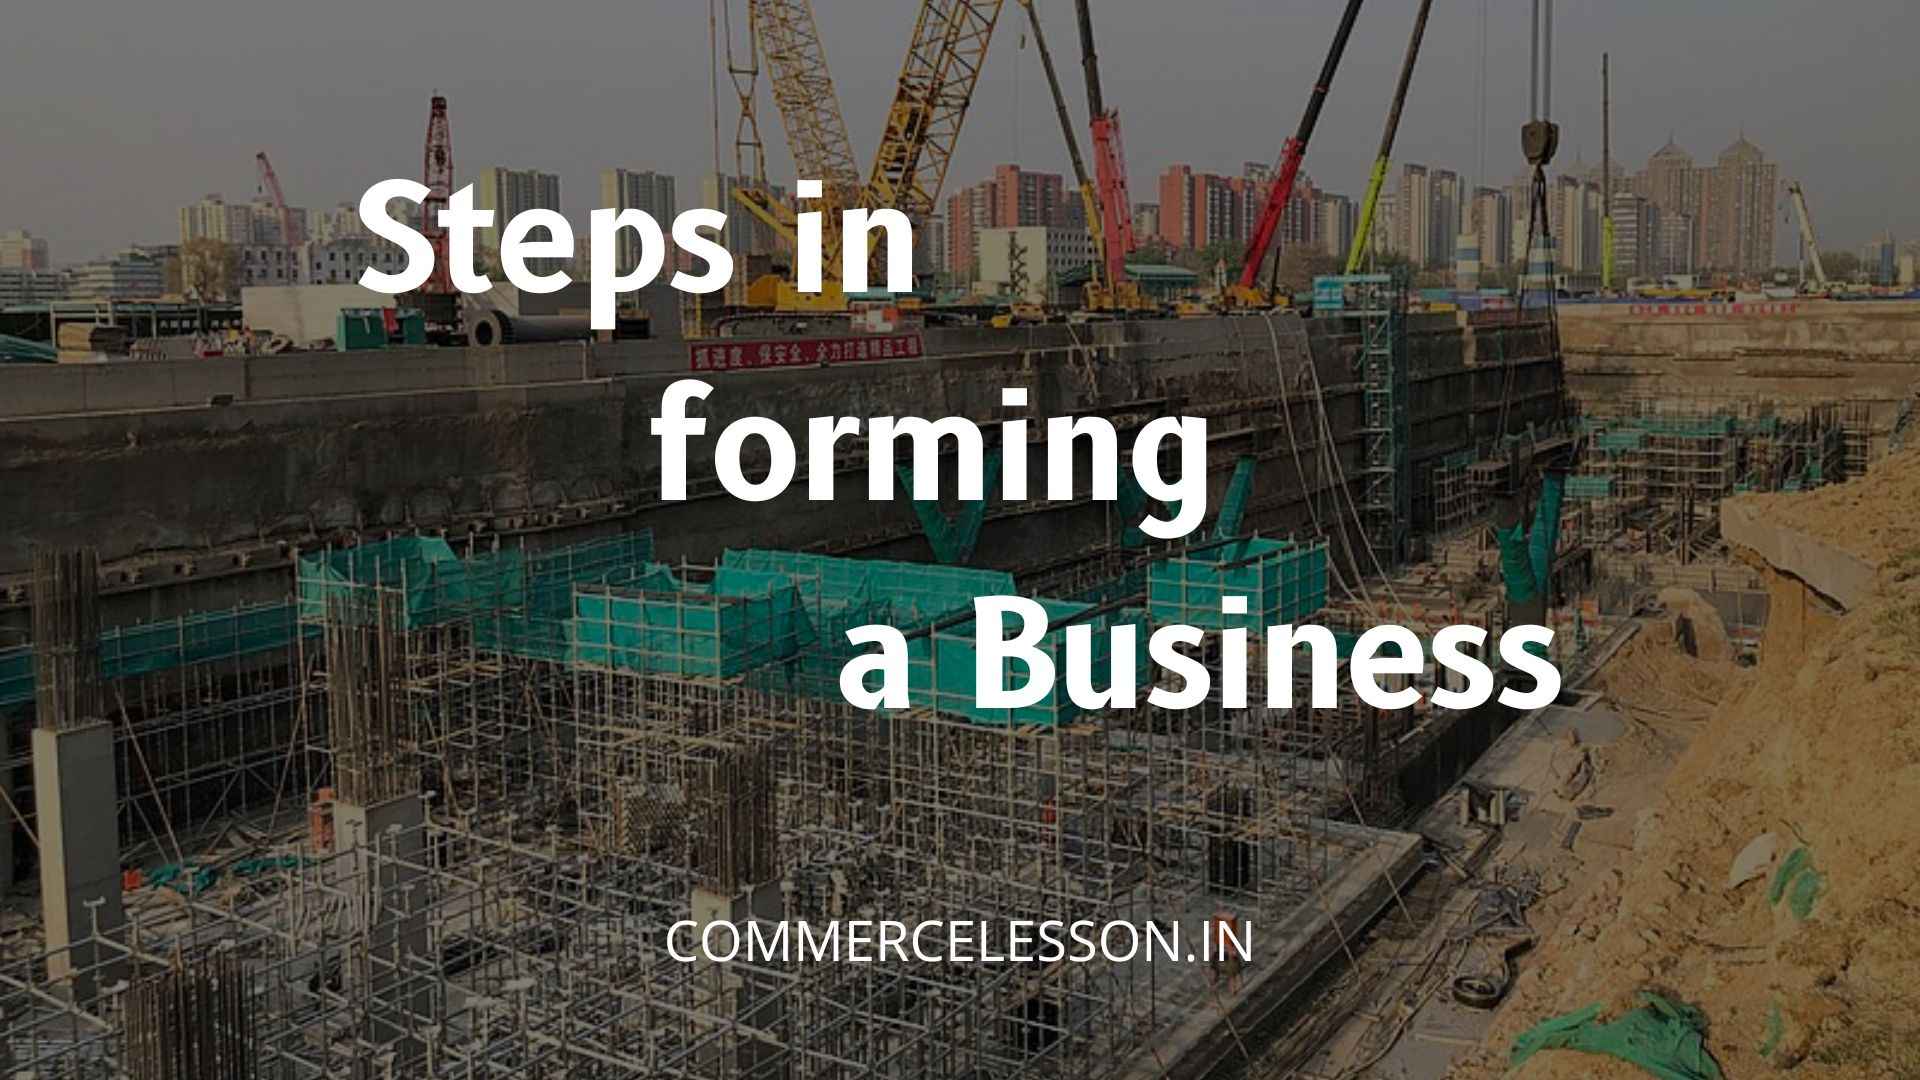 Steps in forming a business